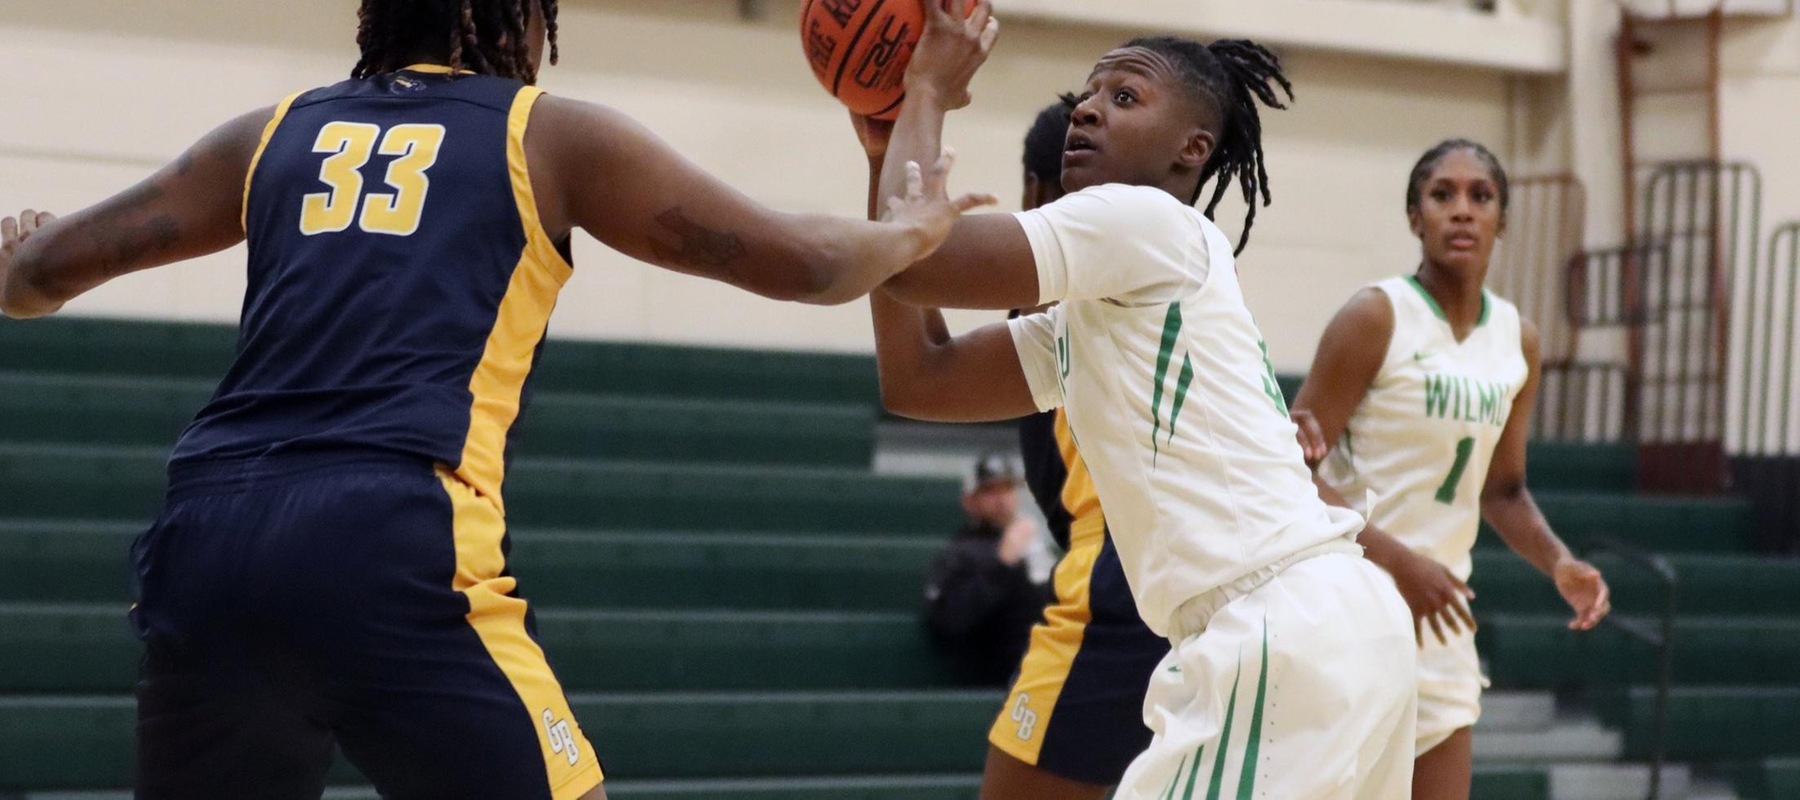 File photo of Emily Ansah who scored a career high 21 points to go with 15 rebounds at Felician. Copyright 2022; Wilmington University. All rights reserved. Photo by Dan Lauletta. January 19, 2022 vs. Goldey-Beacom